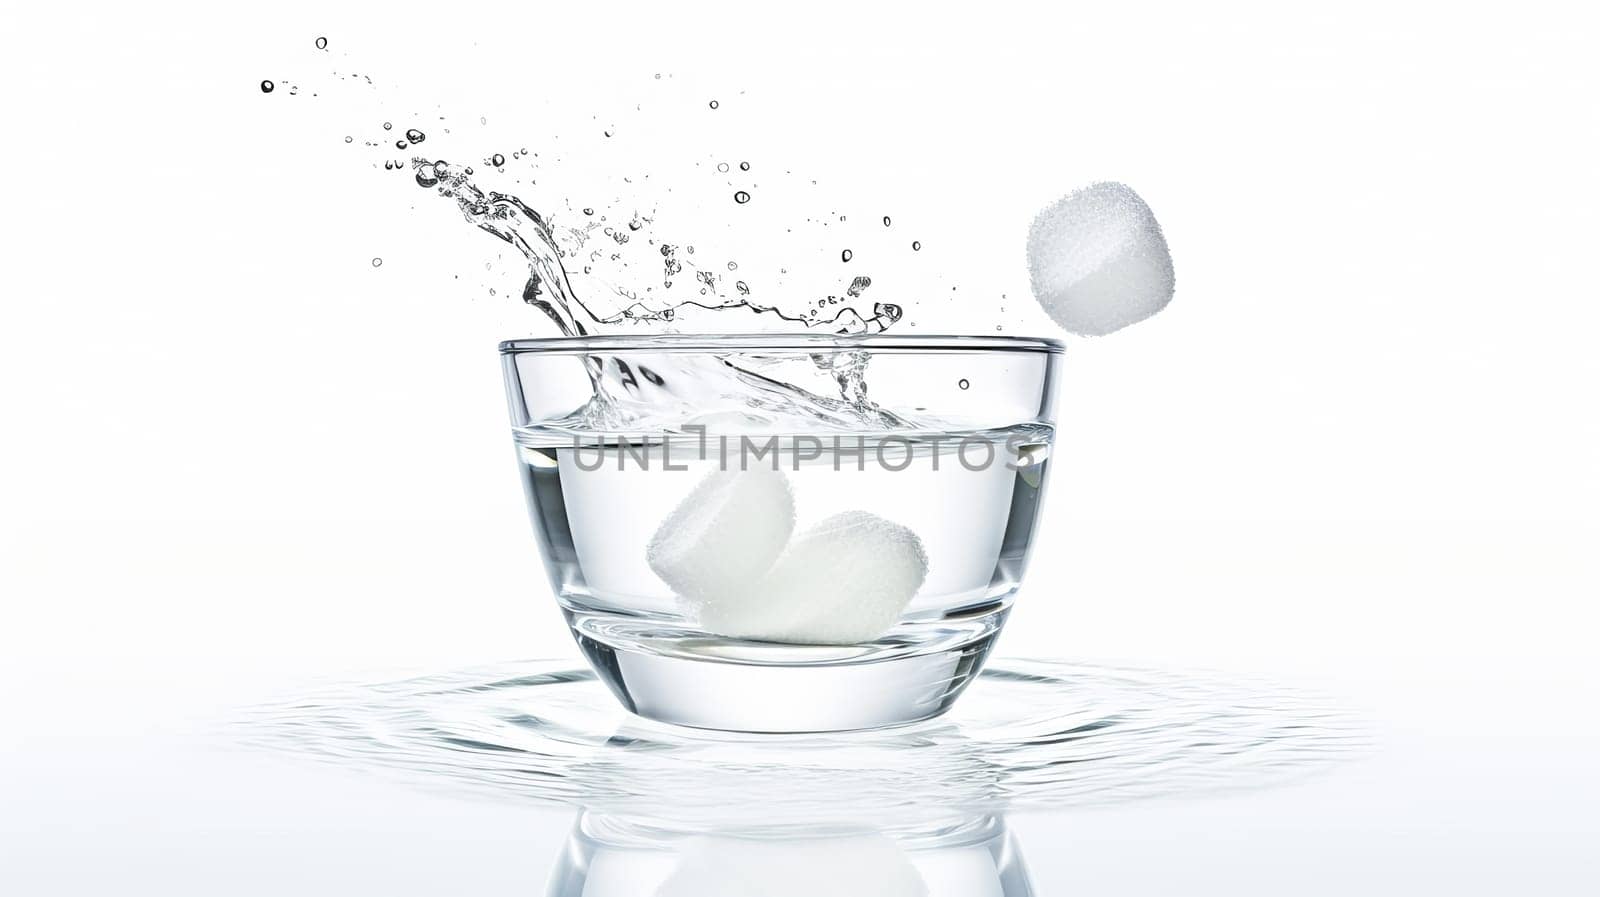 Glass with clear water and pills during illness on a white background. Medicine, treatment in a medical institution, healthy lifestyle, medical life insurance, pharmacies, pharmacy, treatment in a clinic.